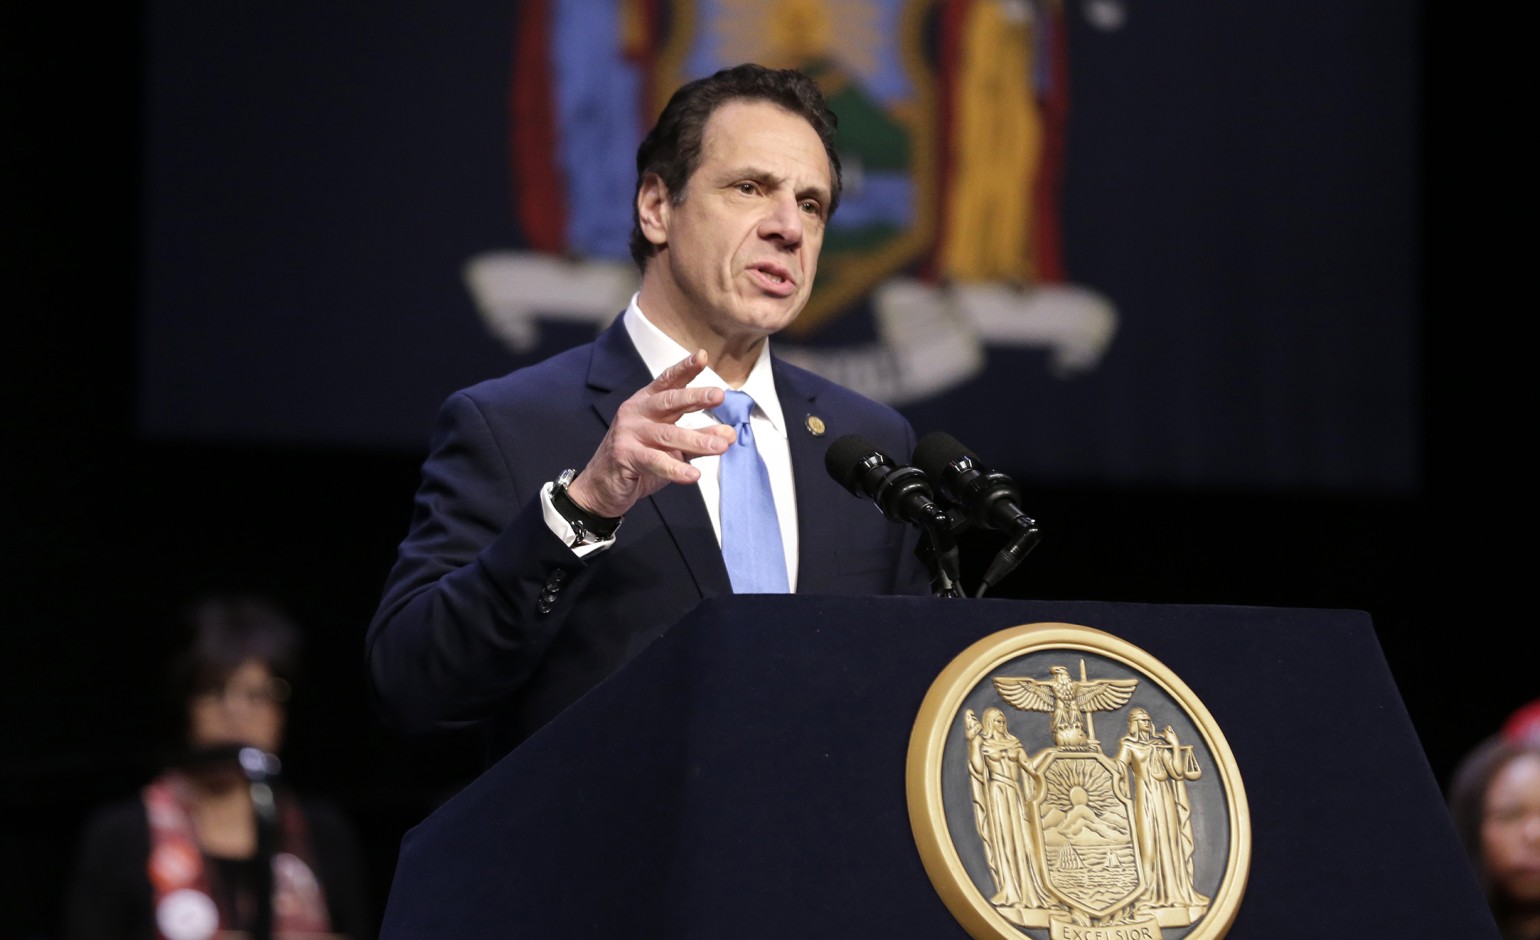  Don’t give Democrats too much credit on Cuomo’s resignation